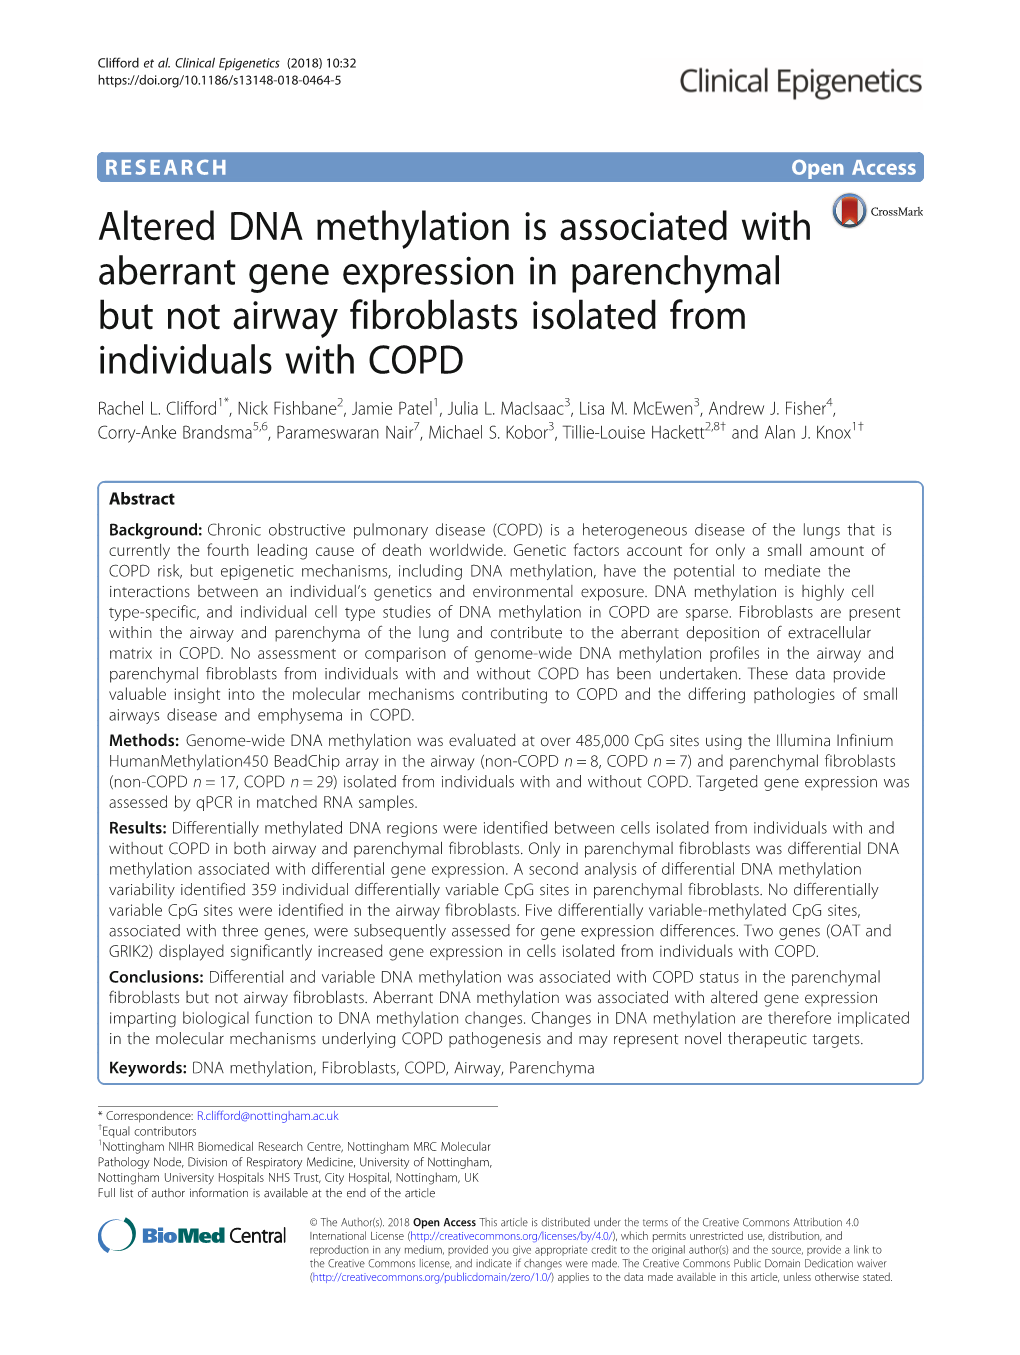 Altered DNA Methylation Is Associated with Aberrant Gene Expression in Parenchymal but Not Airway Fibroblasts Isolated from Individuals with COPD Rachel L